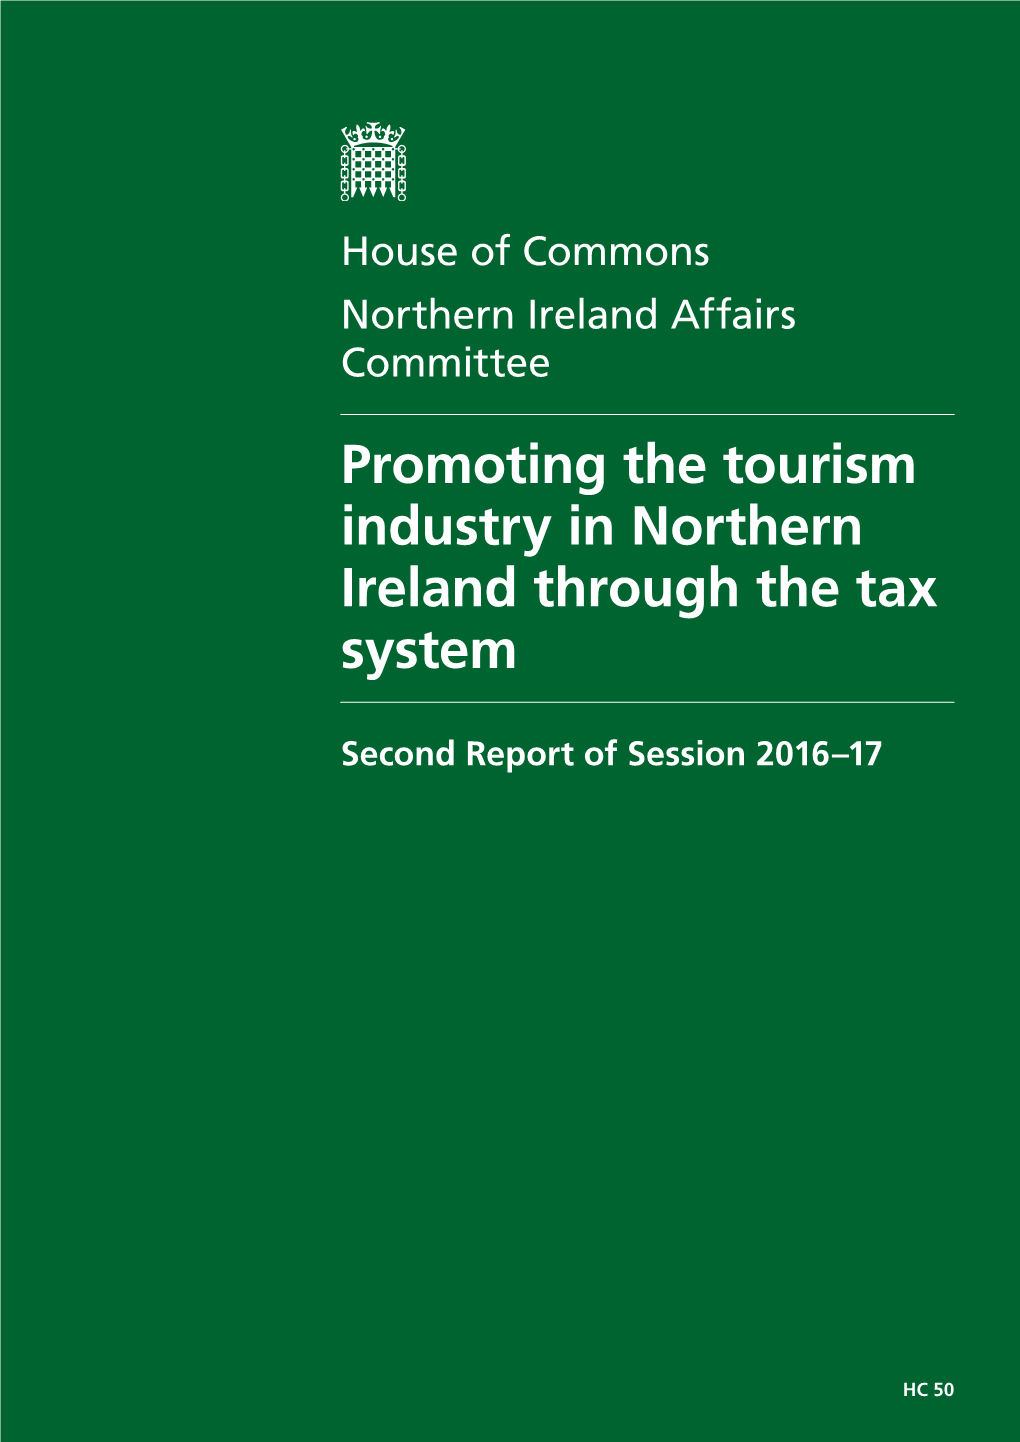 Promoting the Tourism Industry in Northern Ireland Through the Tax System